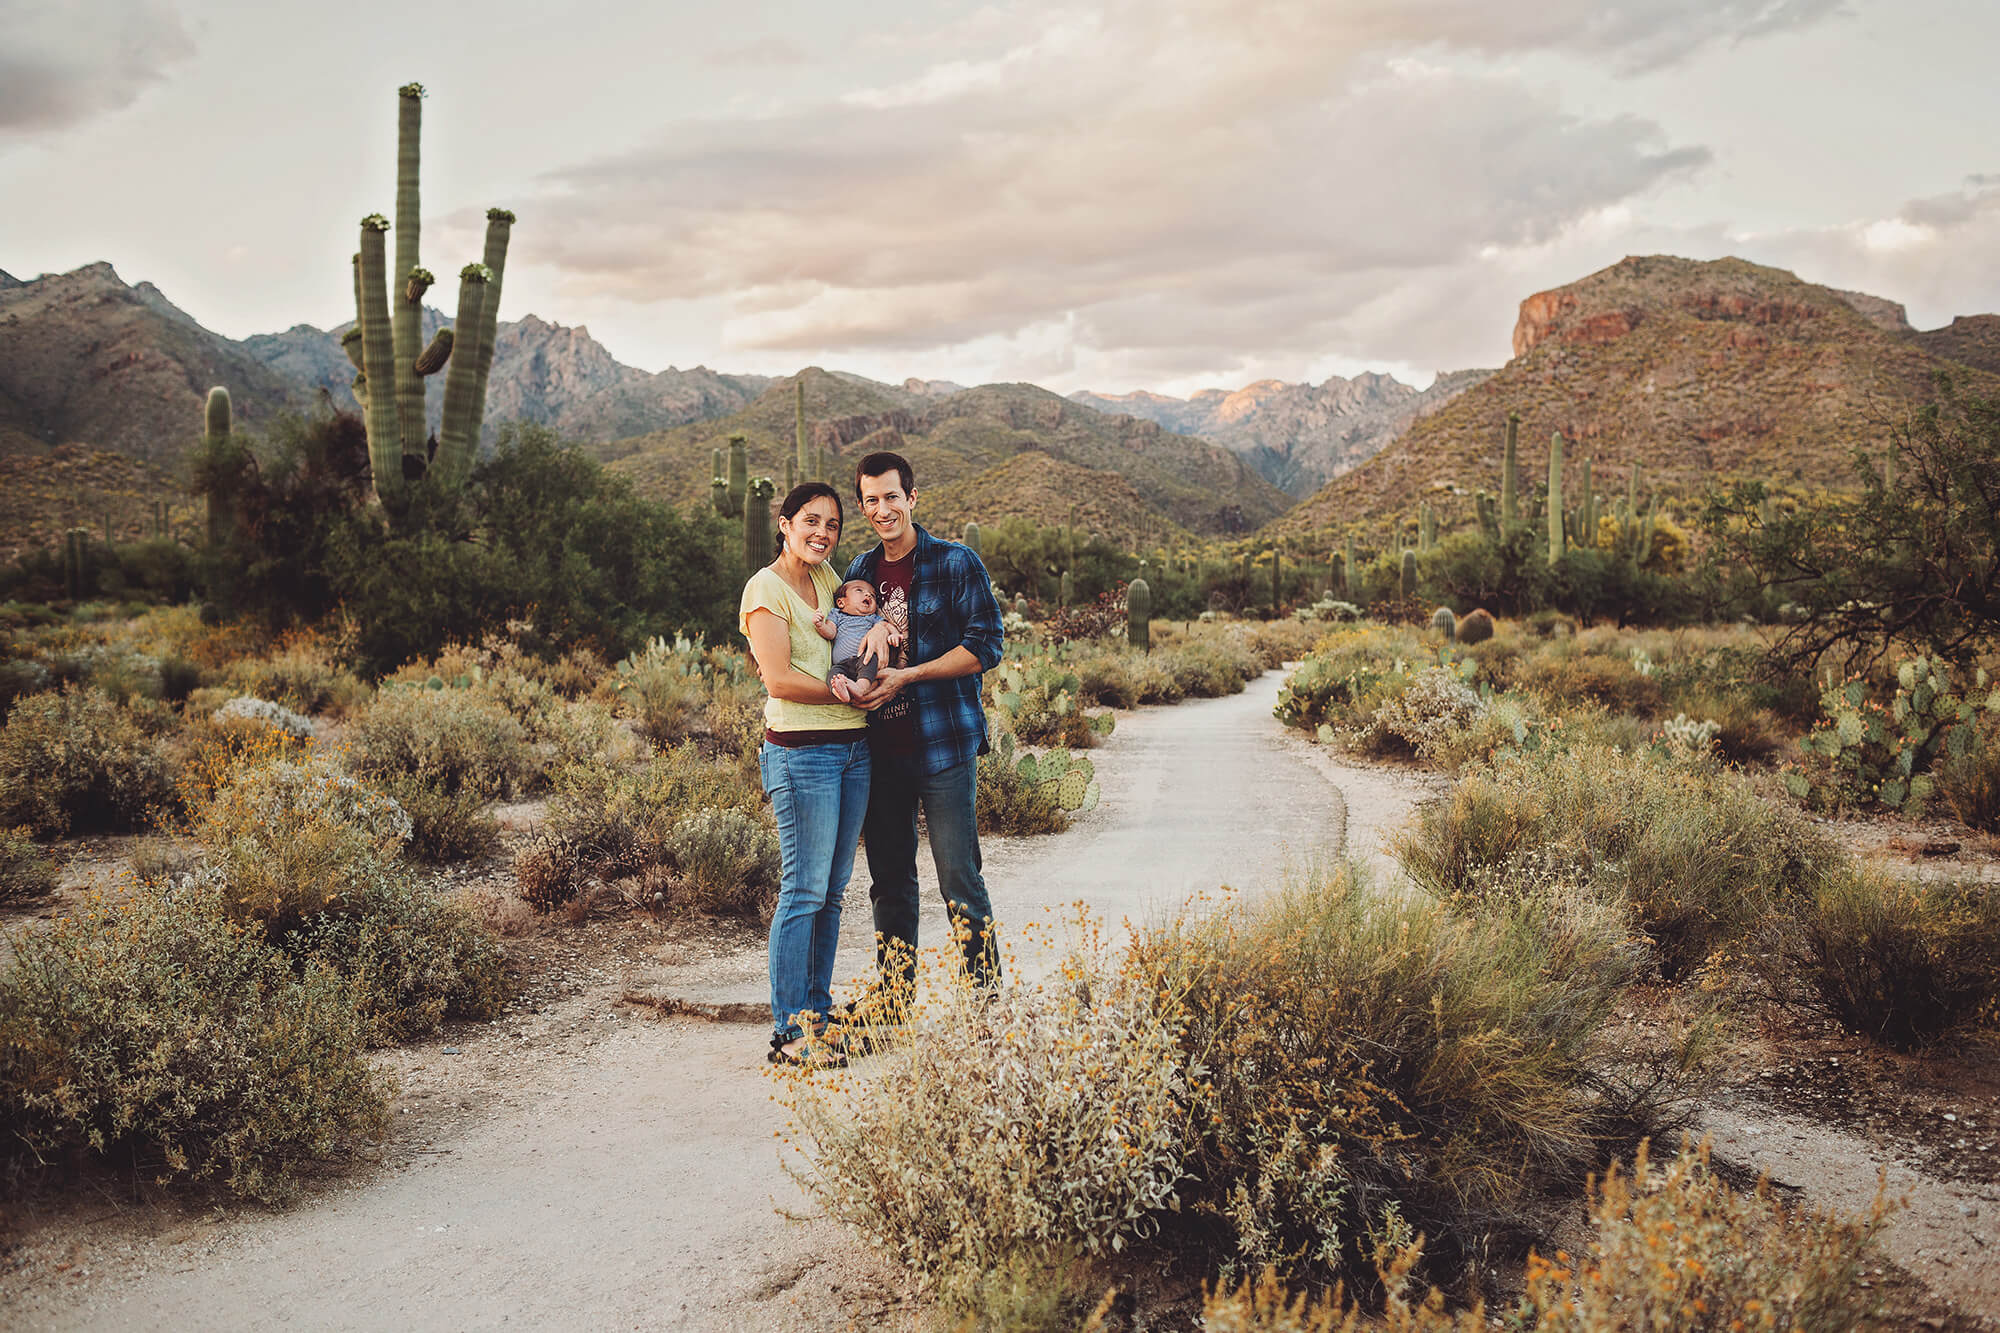 The Sgoutas family cuddles their newborn baby boy to keep him warm amidst the cool temps and wind at Sabino Canyon.